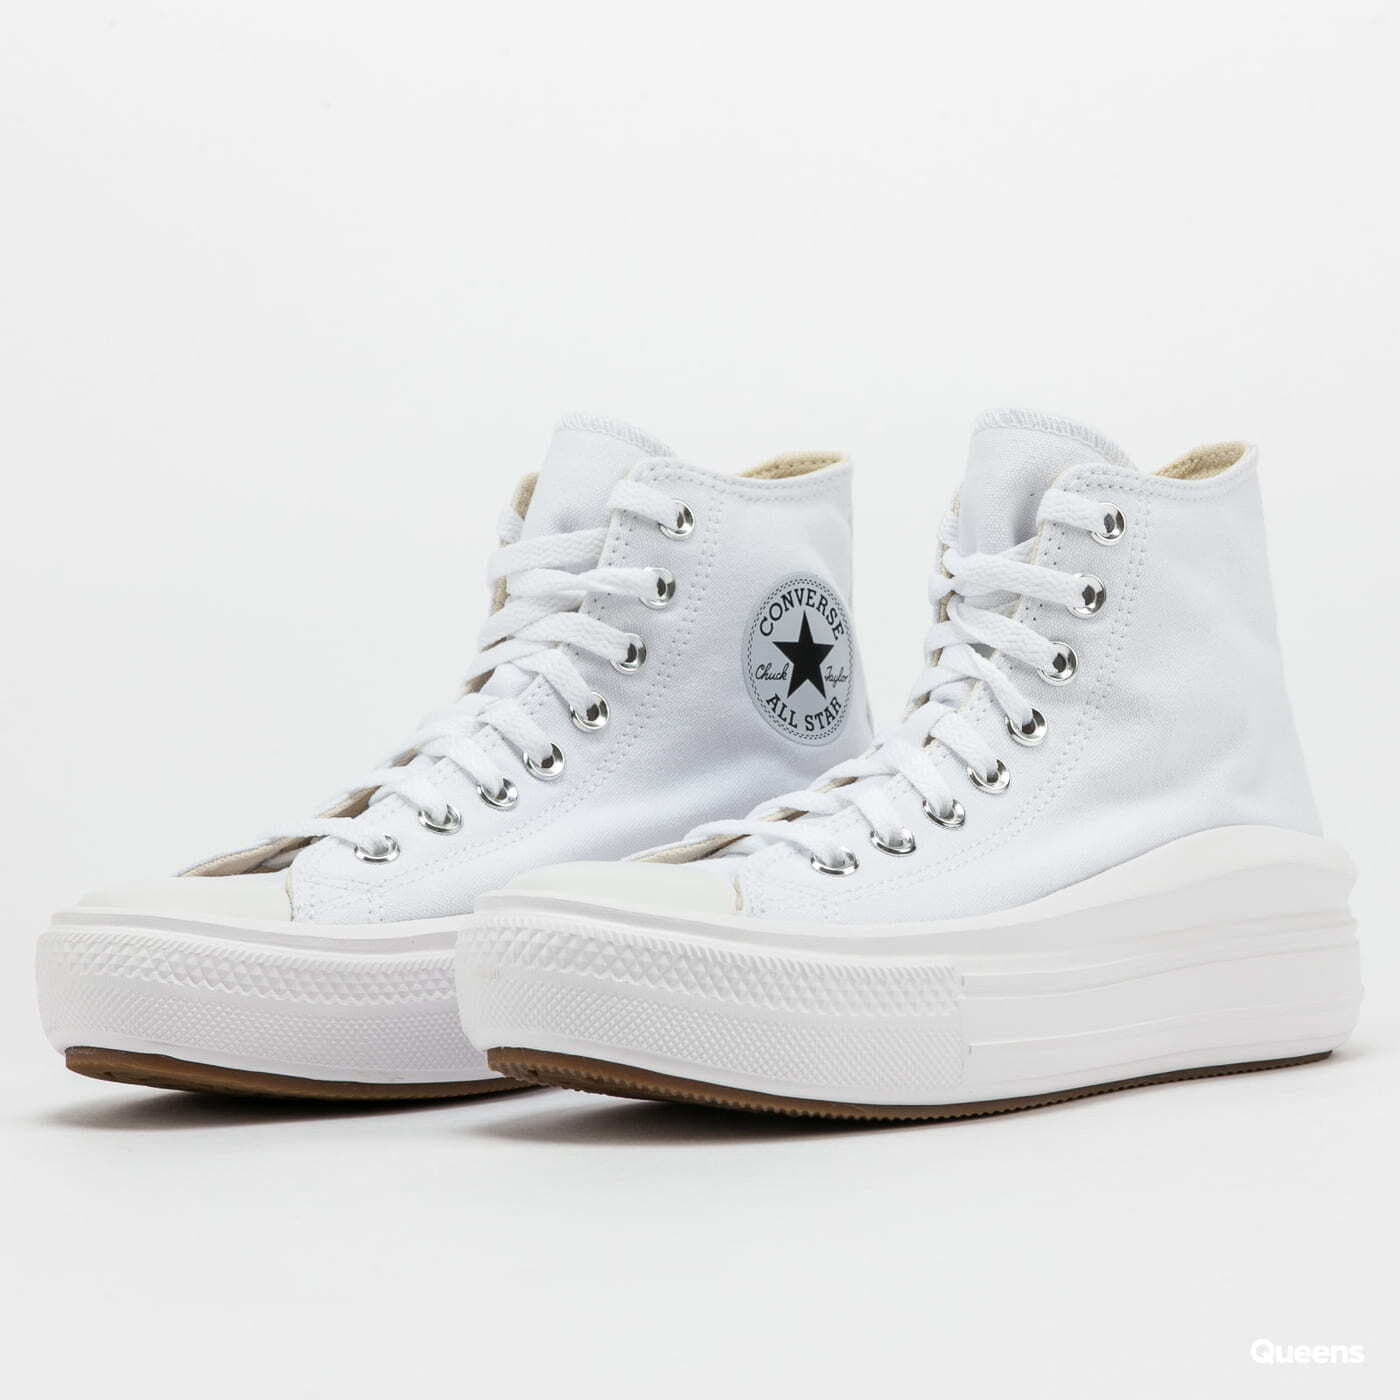 Women's shoes Converse Chuck Taylor All Star Move Hi White/ Natural Ivory/ Black